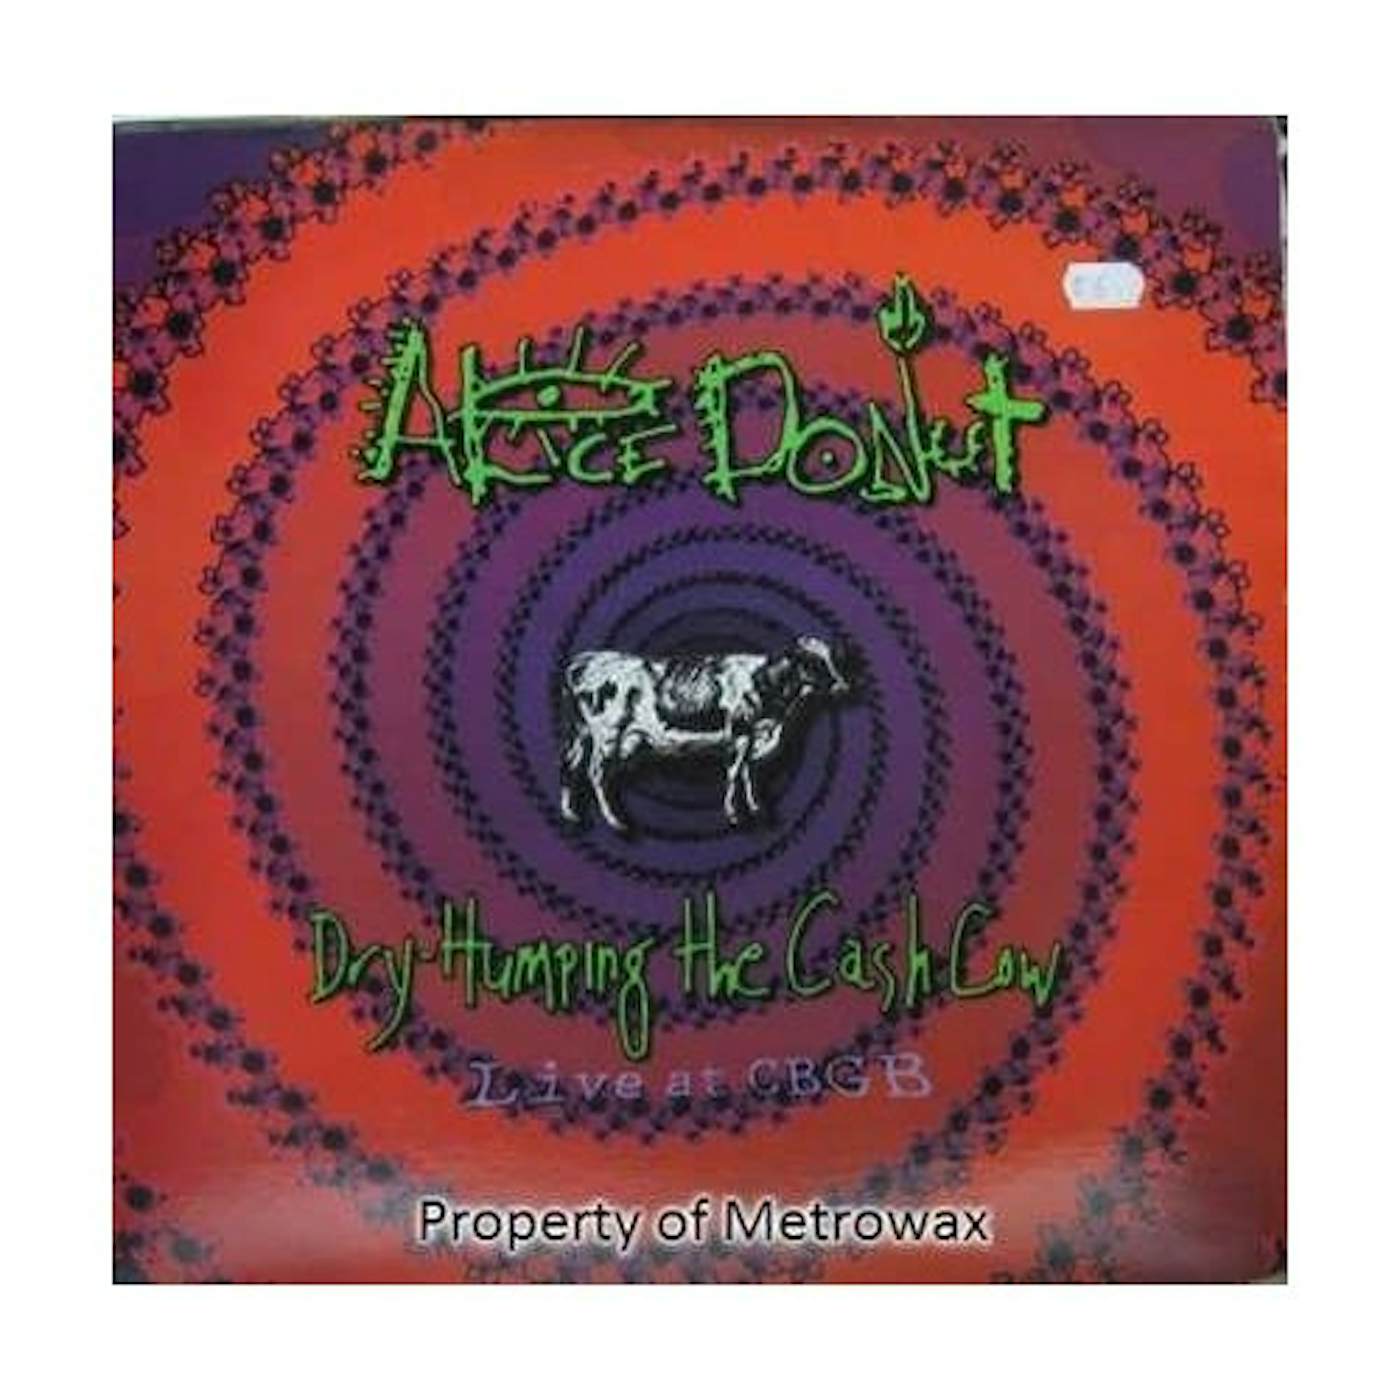 Alice Donut DRY HUMPING THE CASH COW Vinyl Record